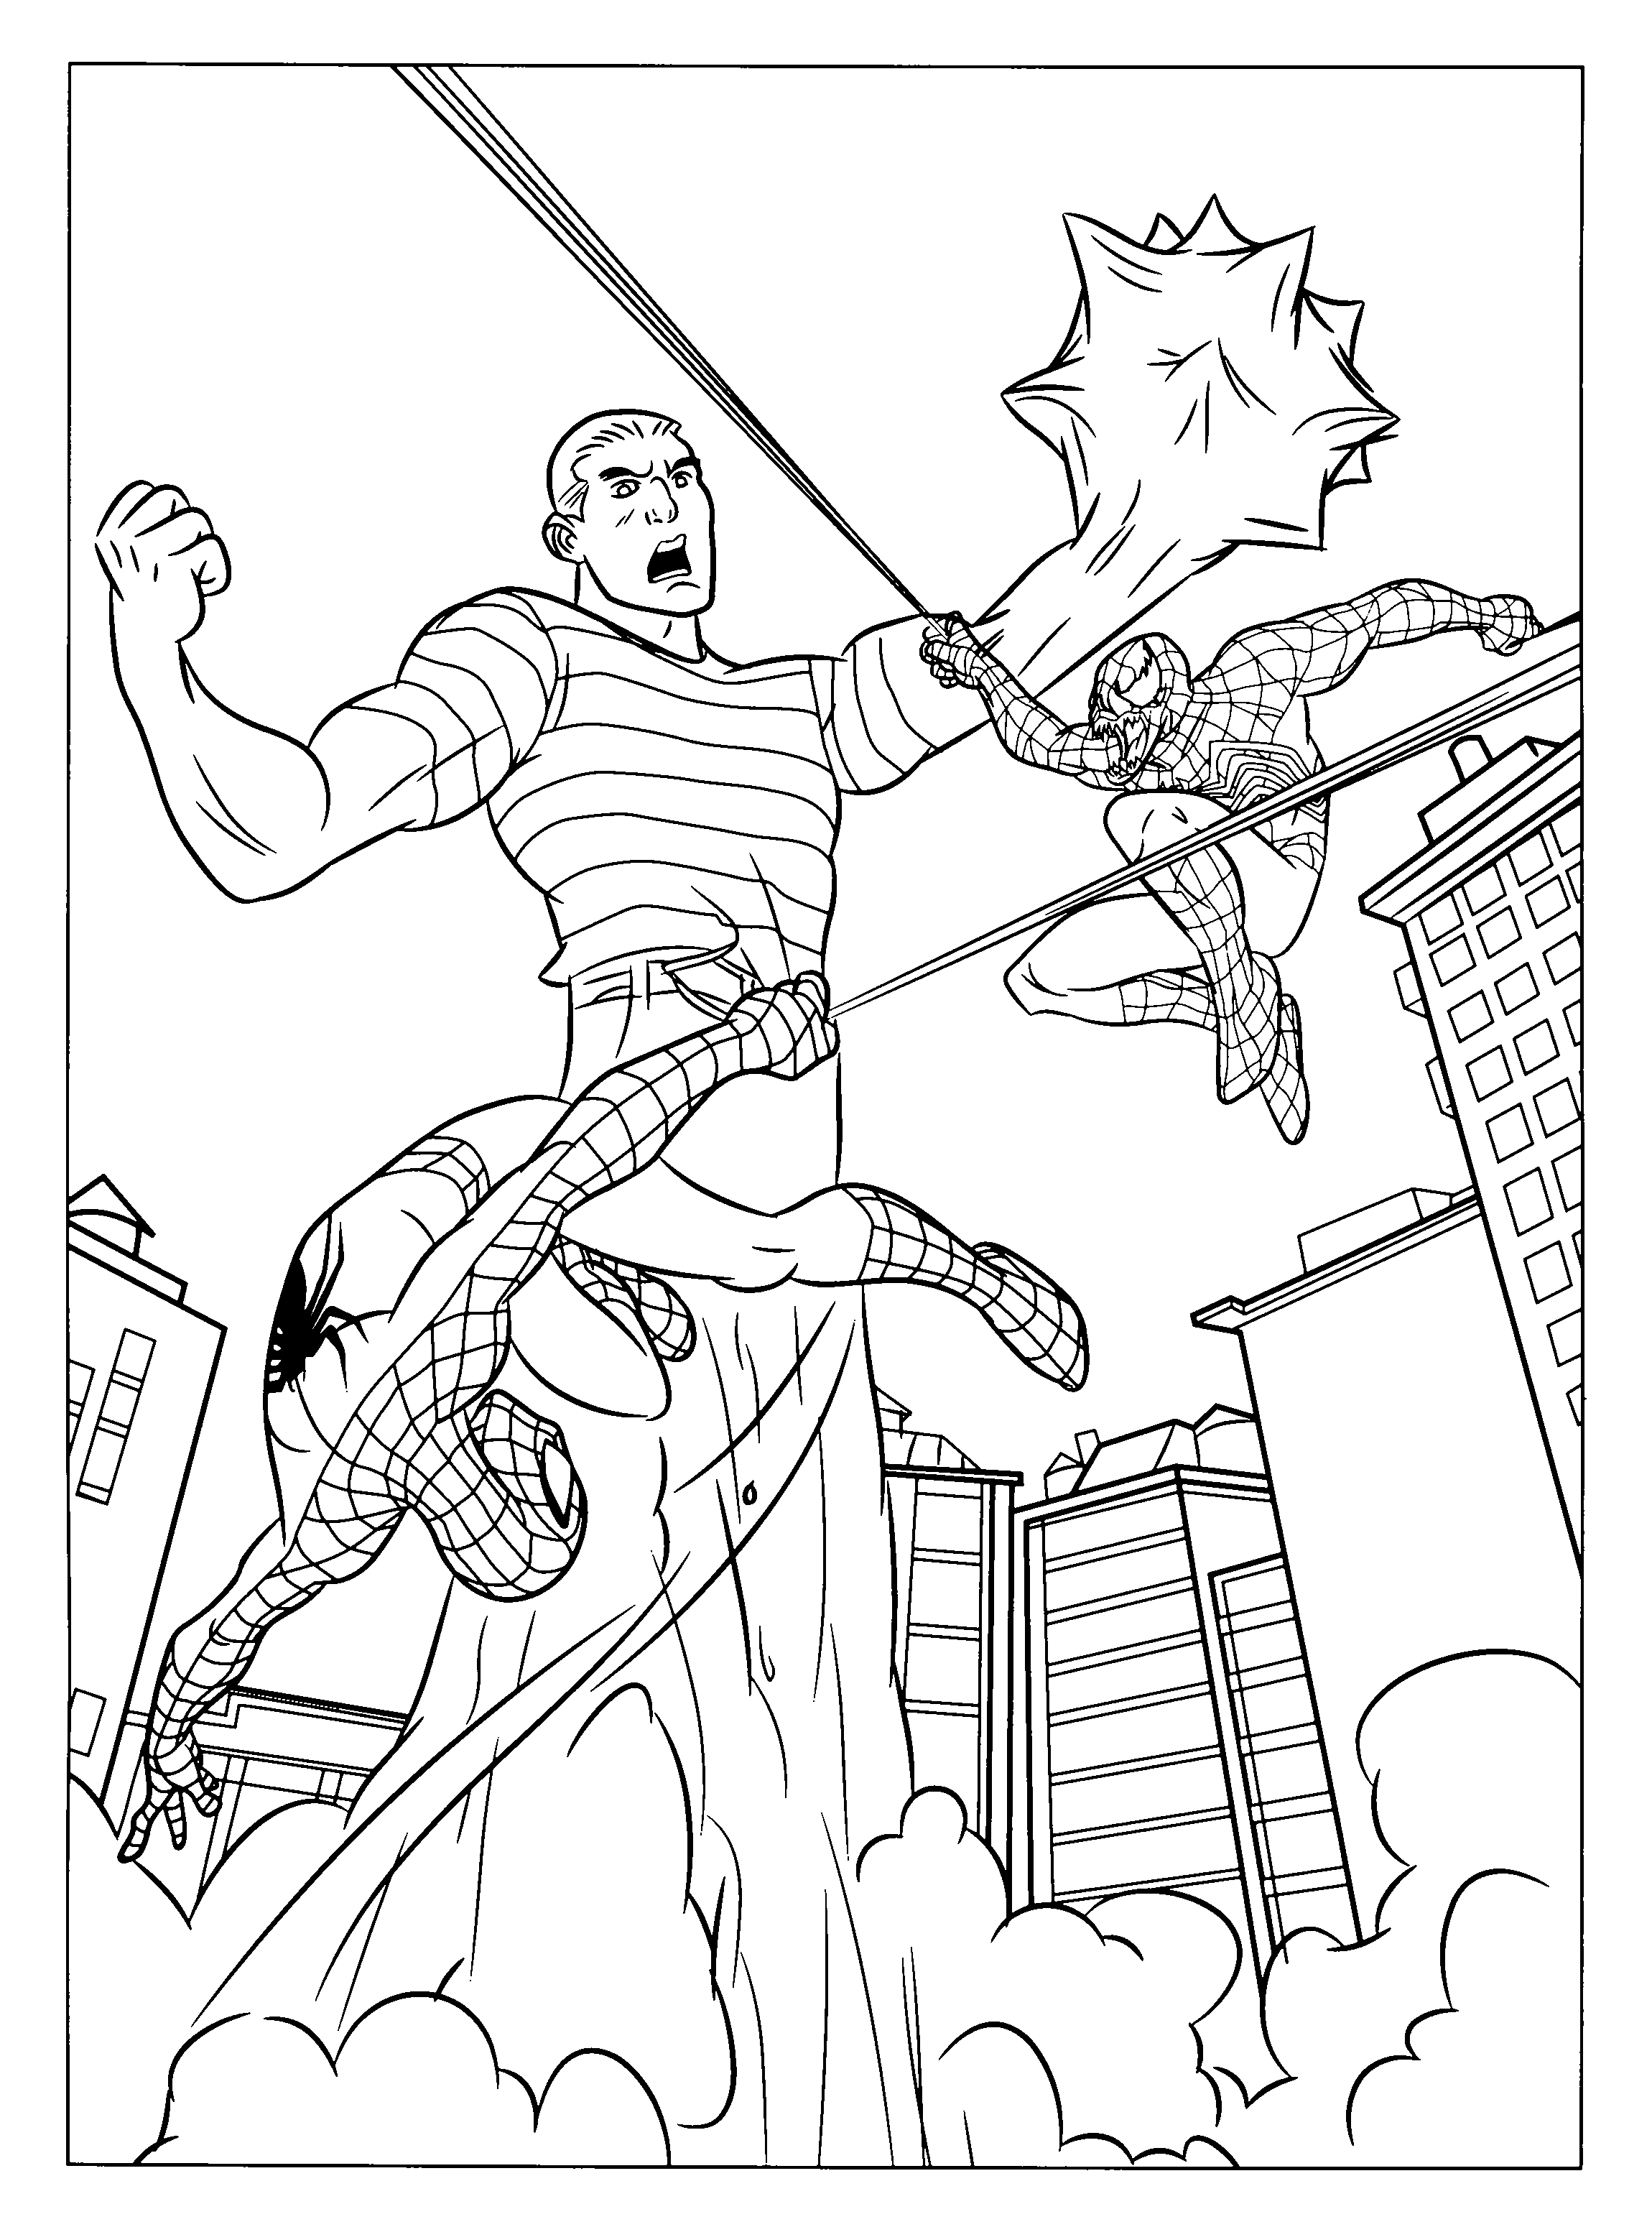 Spiderman Coloring pages | Kids coloring pages | Free coloring pages | #29